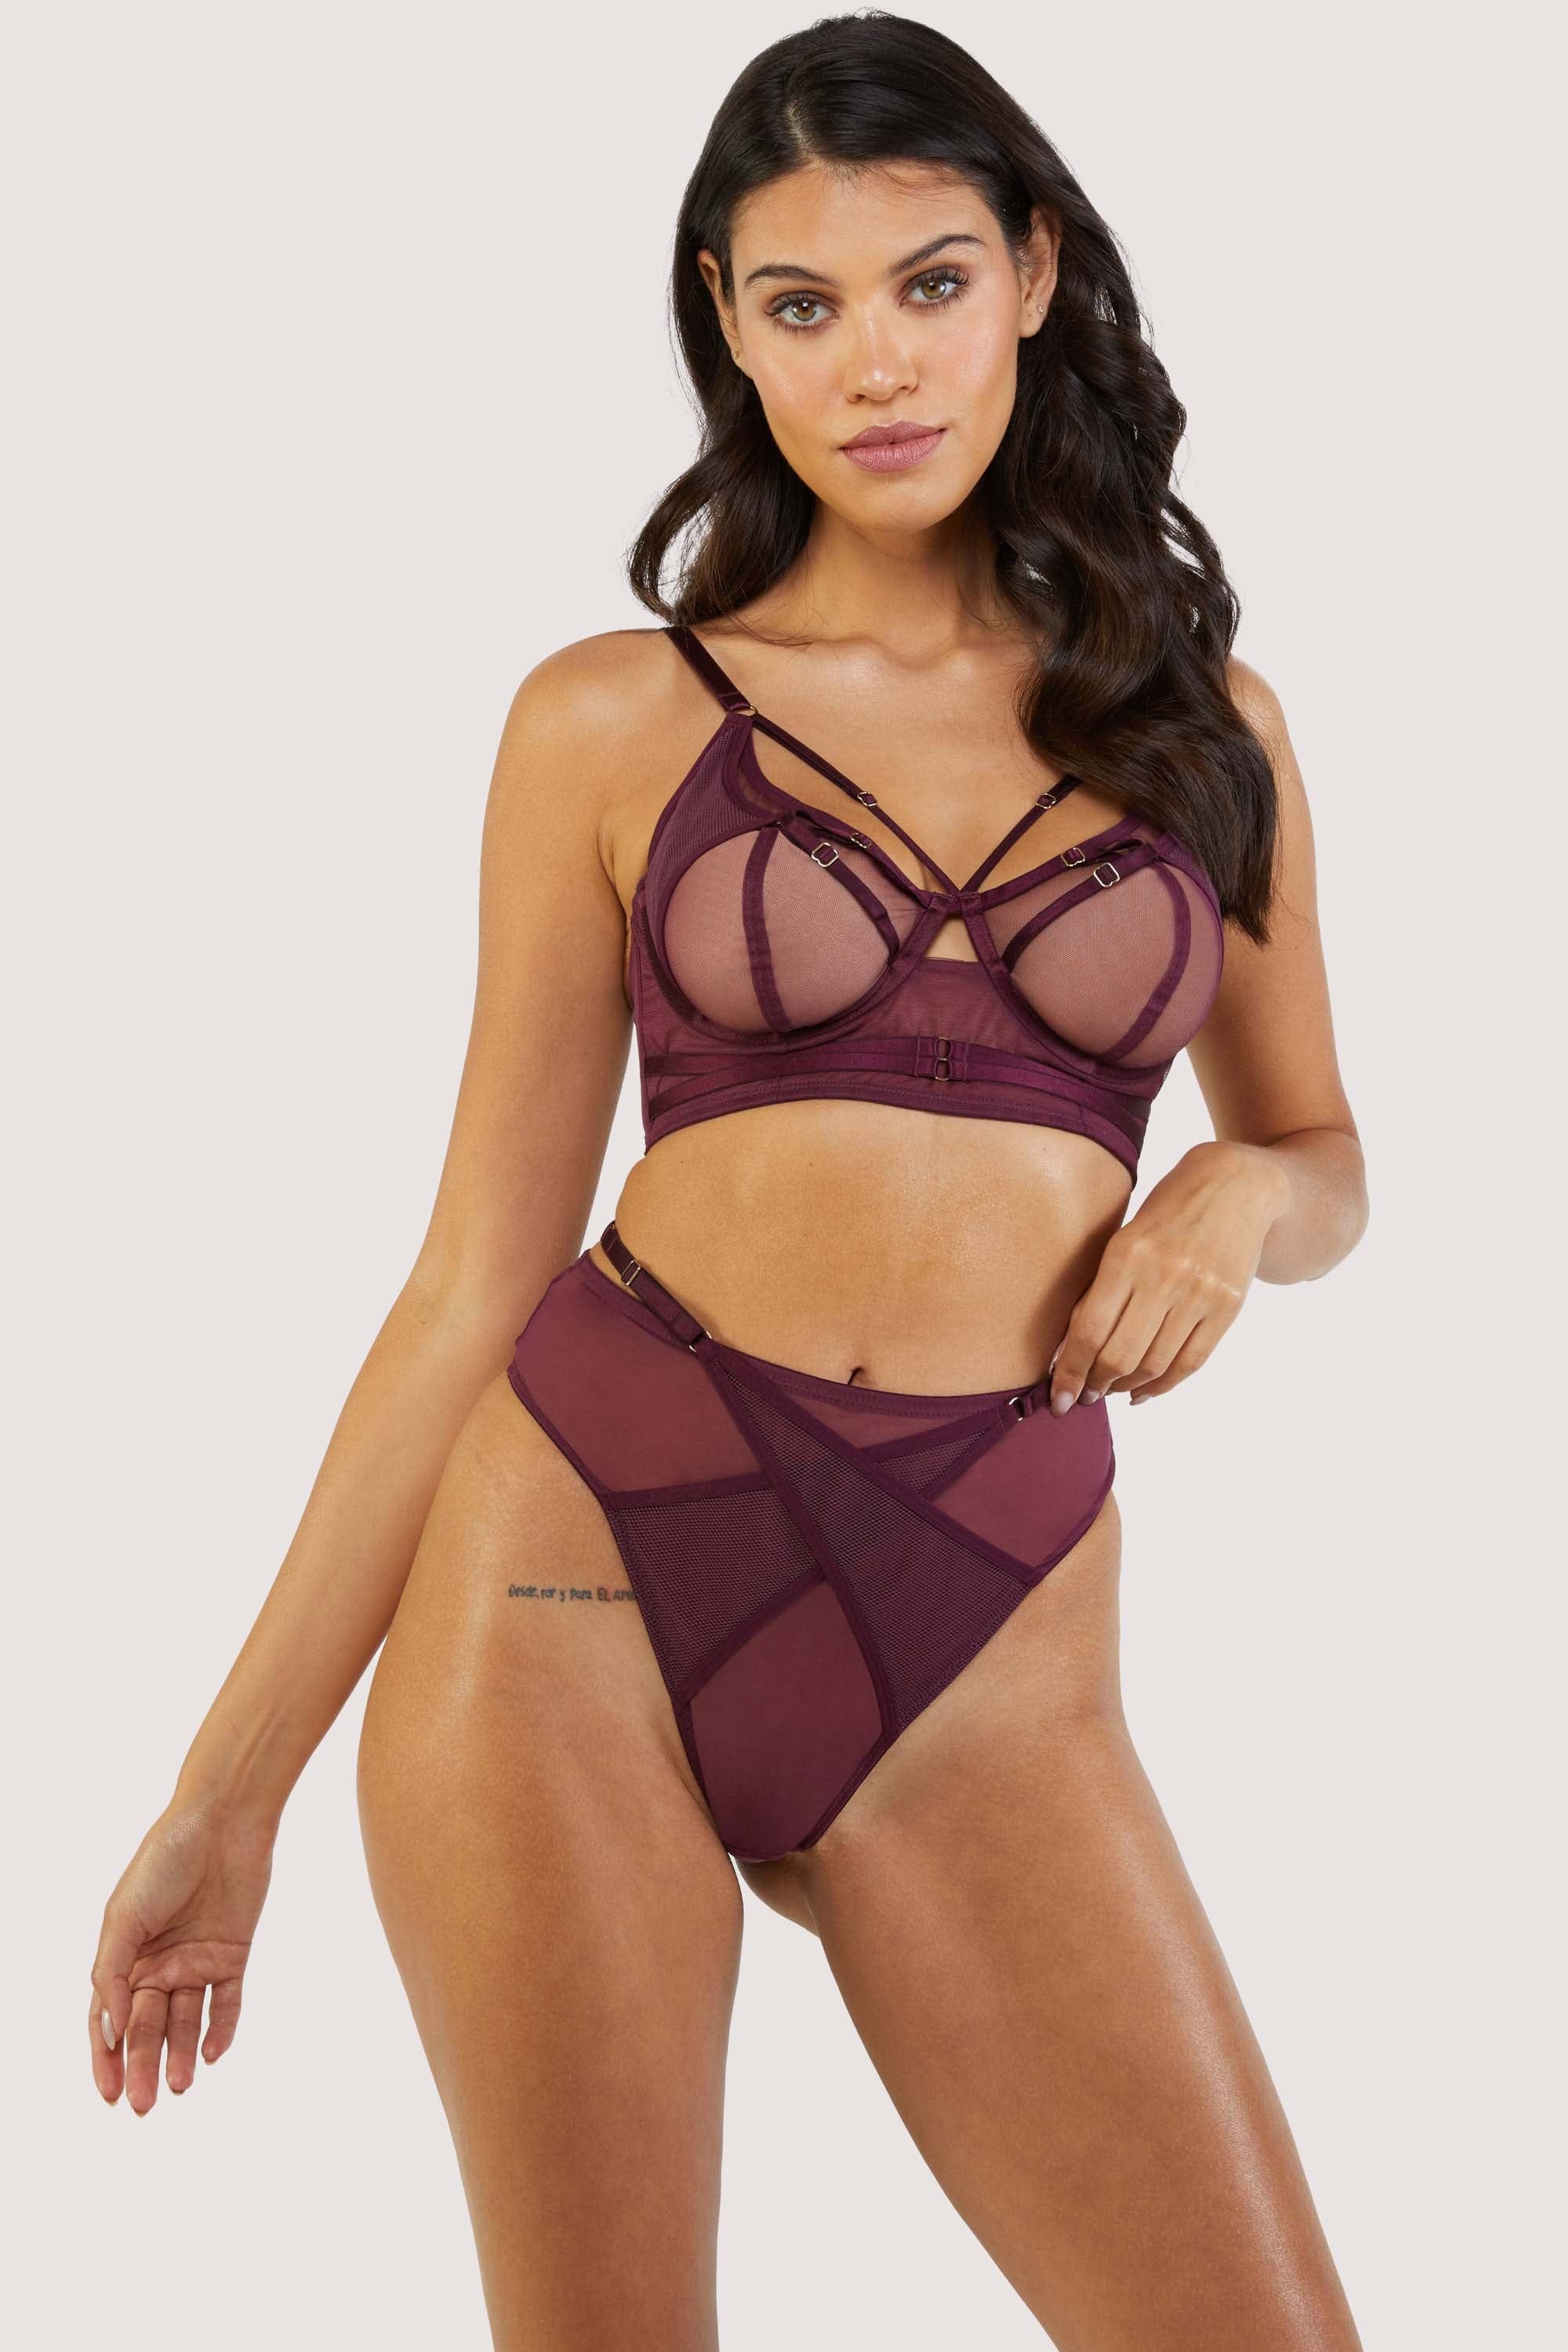 Harness style bra with mesh overlay and visible gold hardware in a deep wine red/purple, worn with a matching brief..